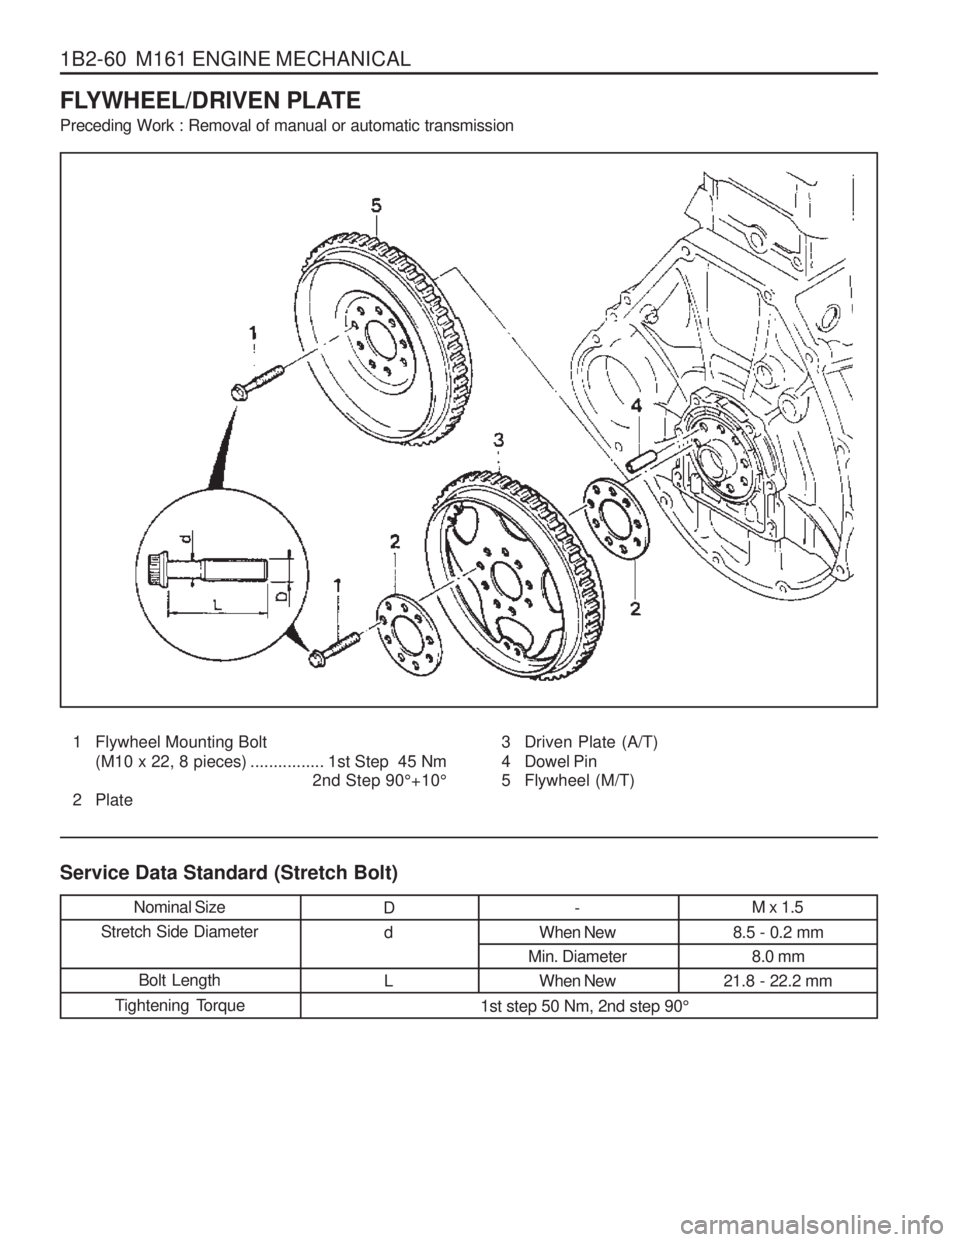 SSANGYONG MUSSO 2003  Service Manual 1B2-60  M161 ENGINE MECHANICAL 
FLYWHEEL/DRIVEN PLATE Preceding Work : Removal of manual or automatic transmission
1 Flywheel Mounting Bolt(M10 x 22, 8 pieces) ................ 1st Step  45 Nm 2nd Ste